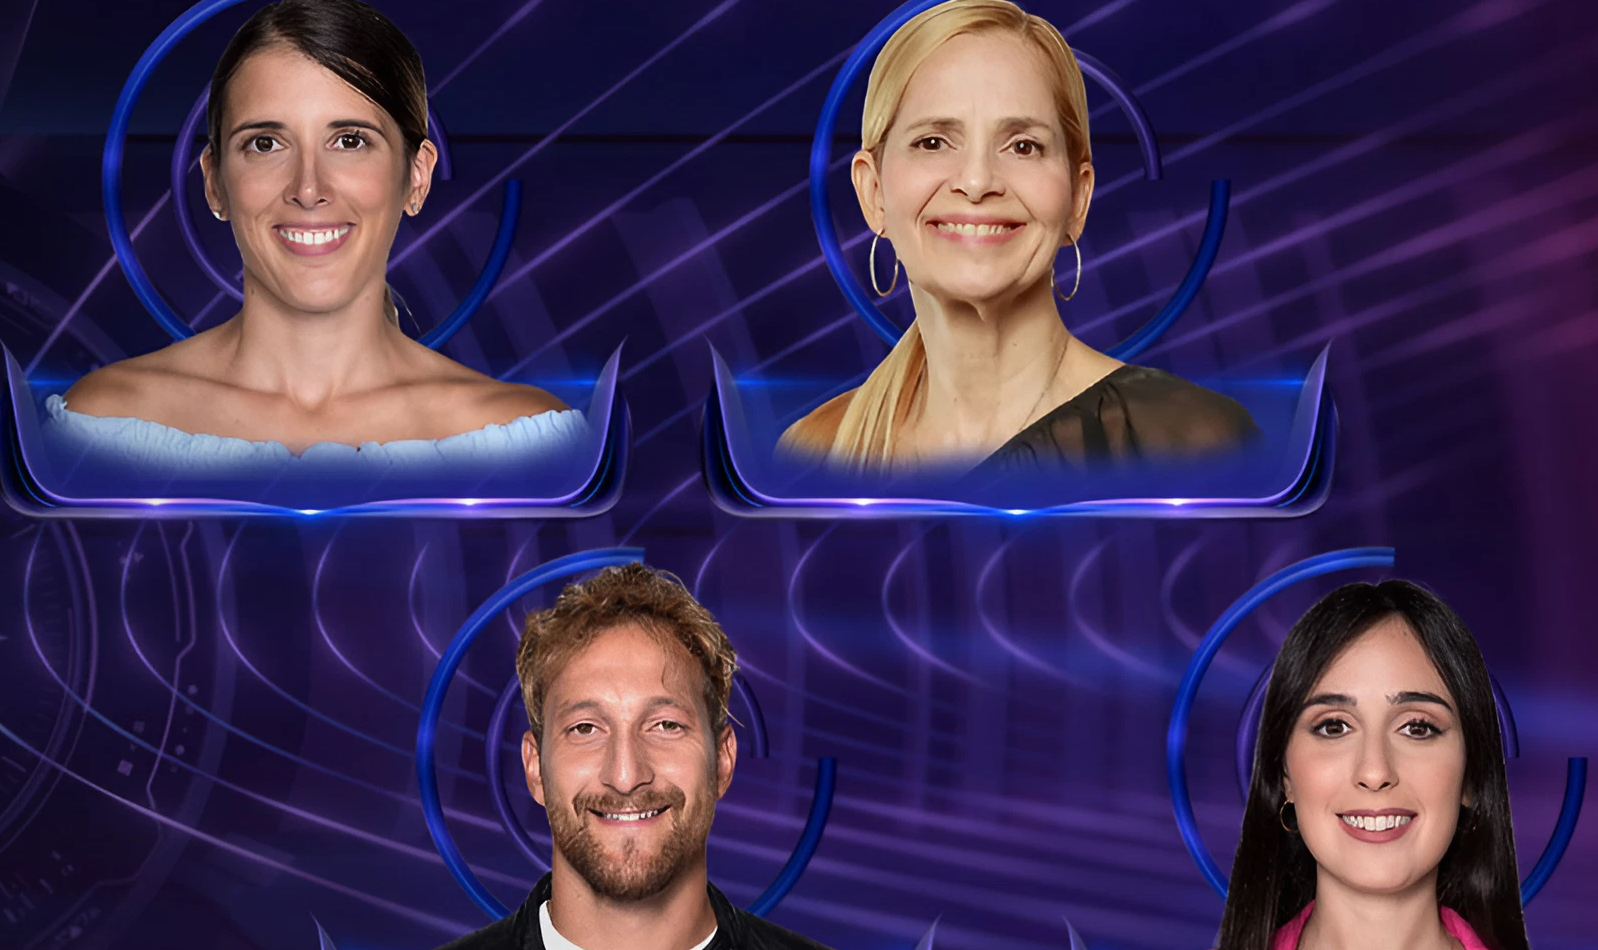 Big Brother nominations October 12nd, who will be eliminated?